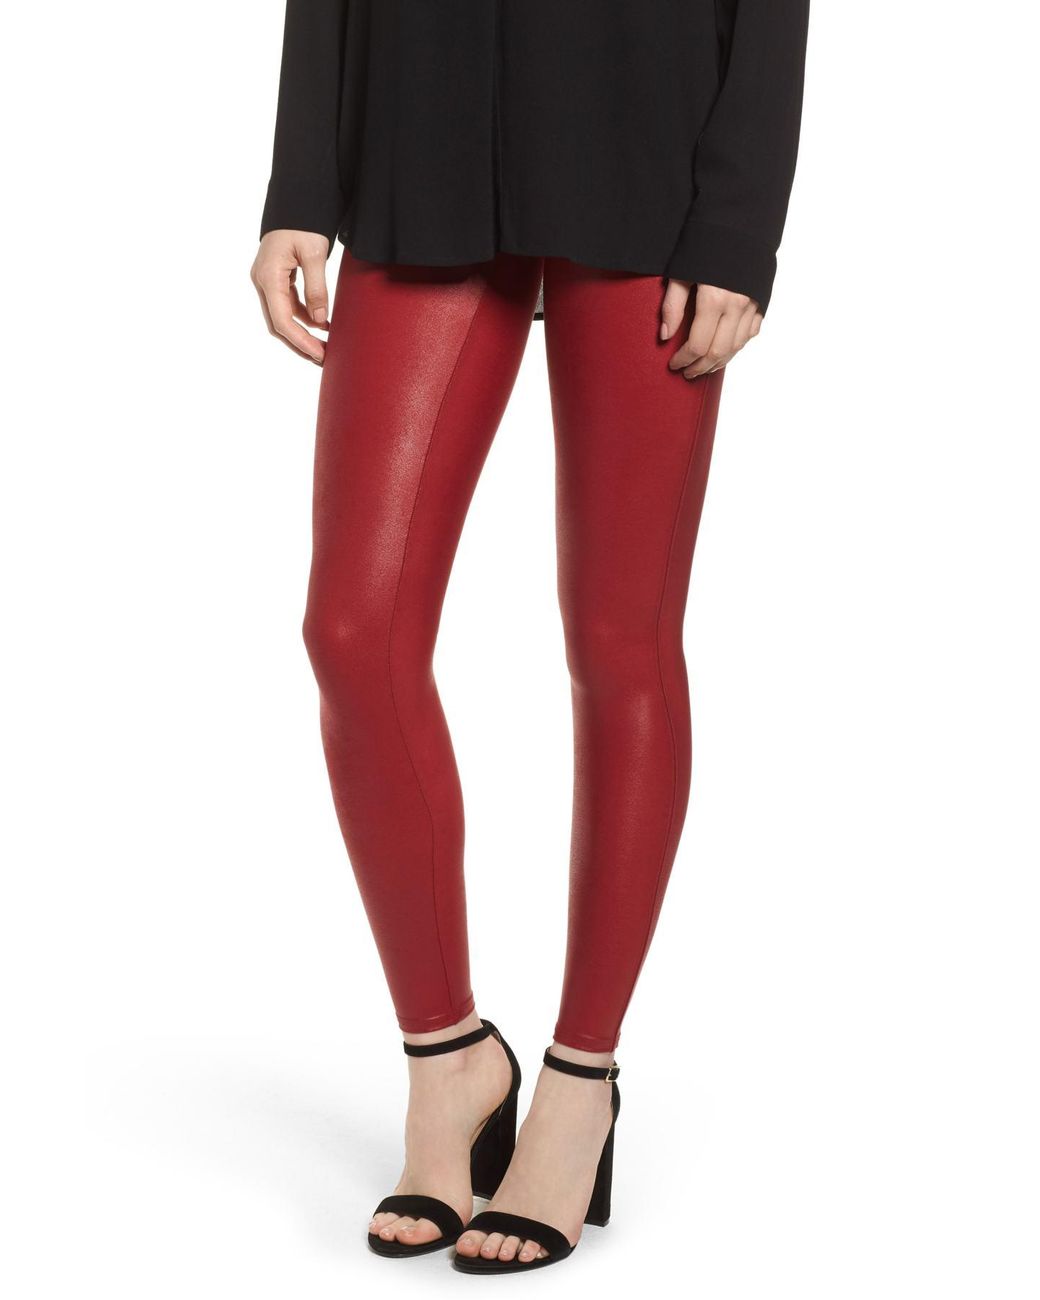  Red Hot by Spanx Women's Leather Look Shaping Leggings